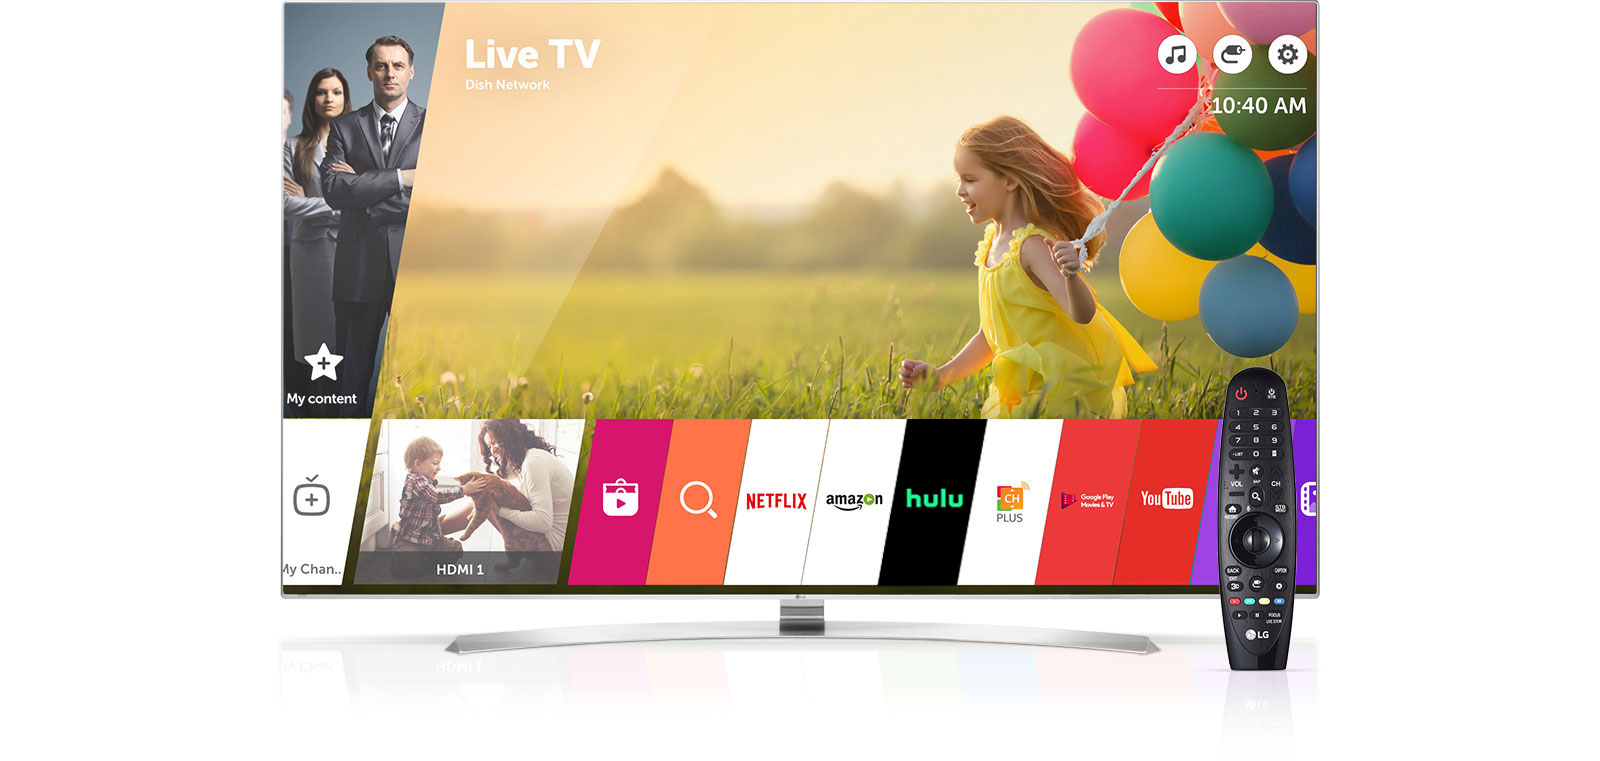 LG TV w/ webOS: A of Content | LG